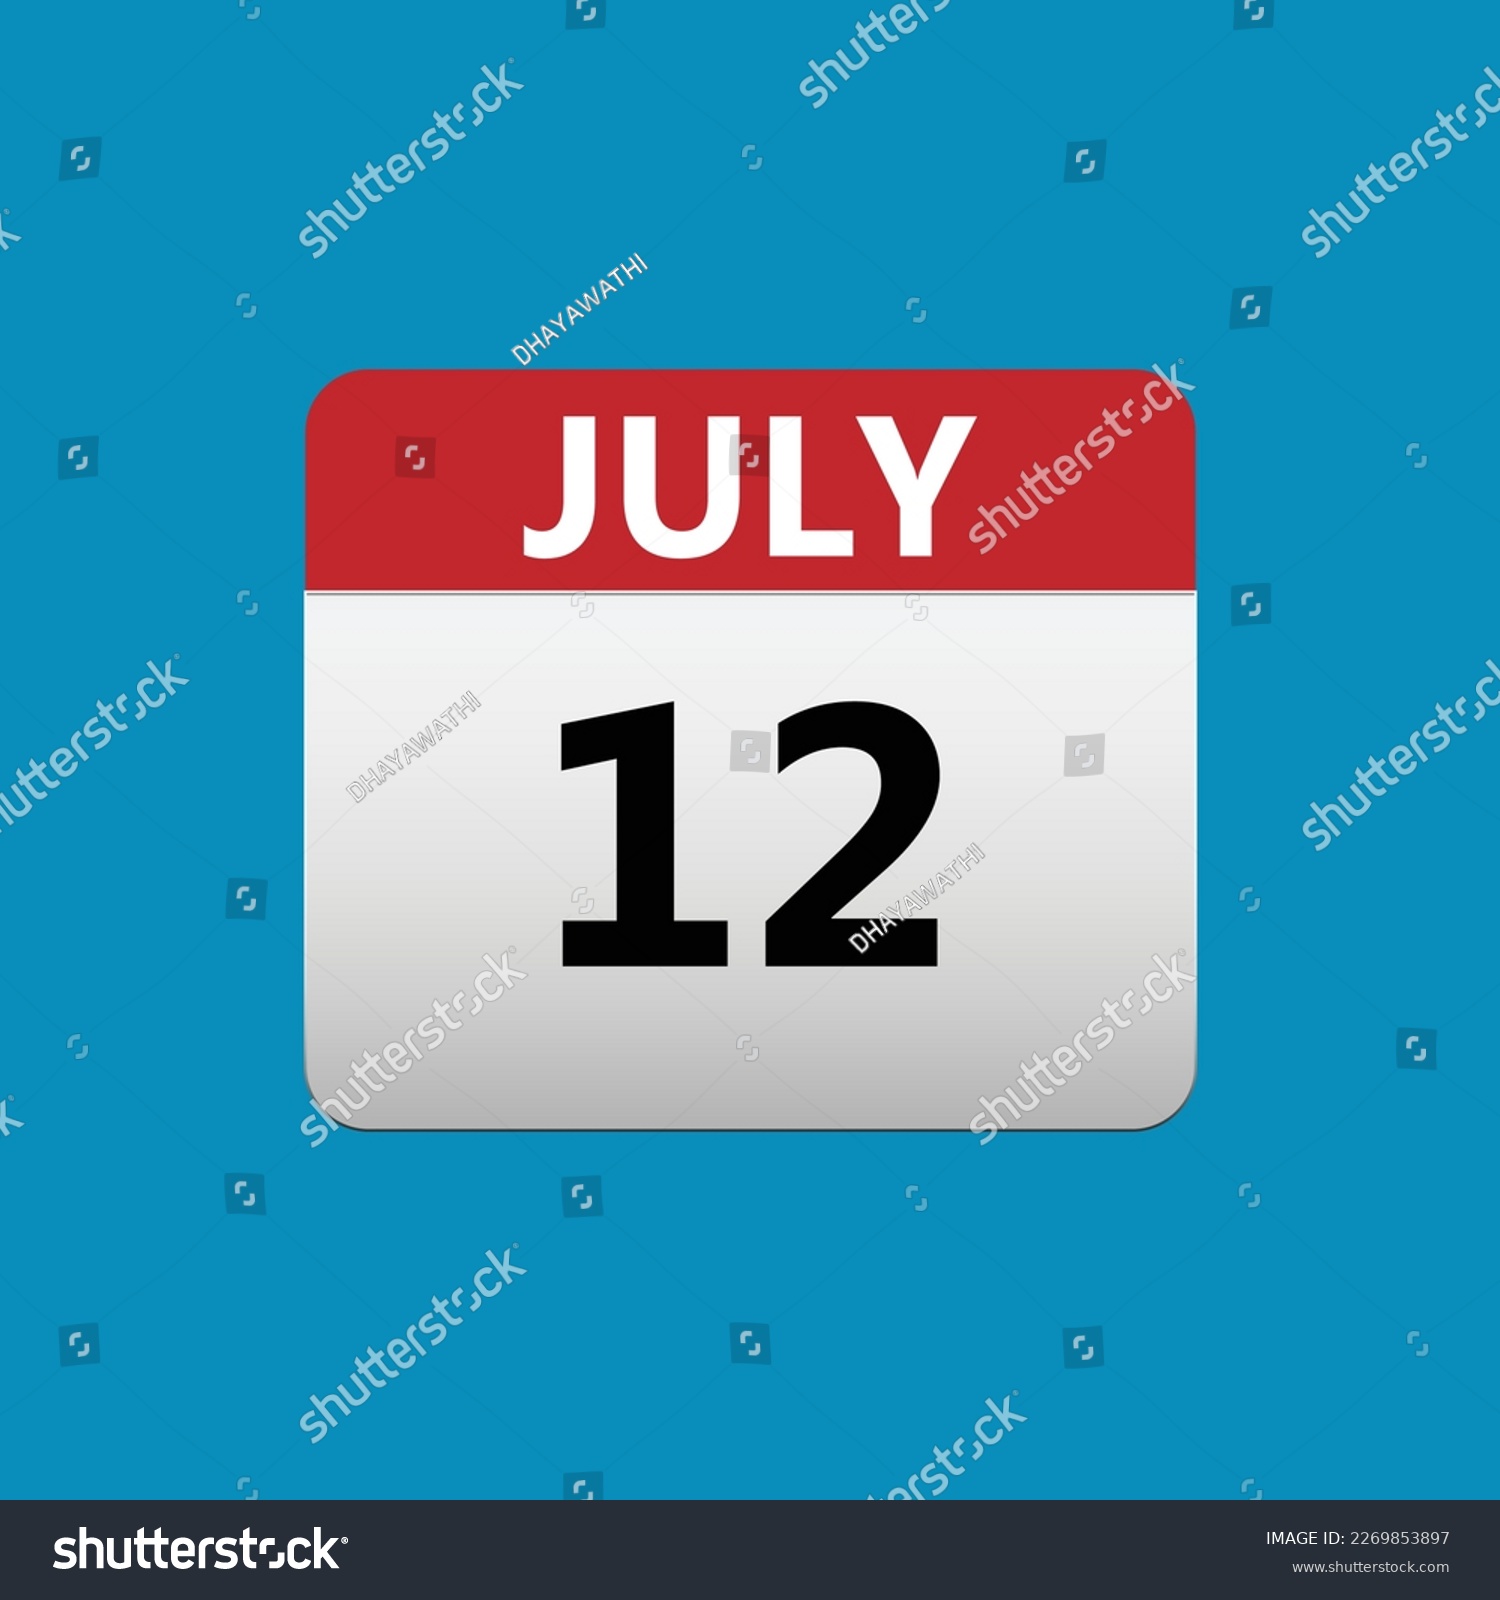 SVG of 12th July calendar icon. July 12 calendar Date Month icon. Isolated on blue background svg